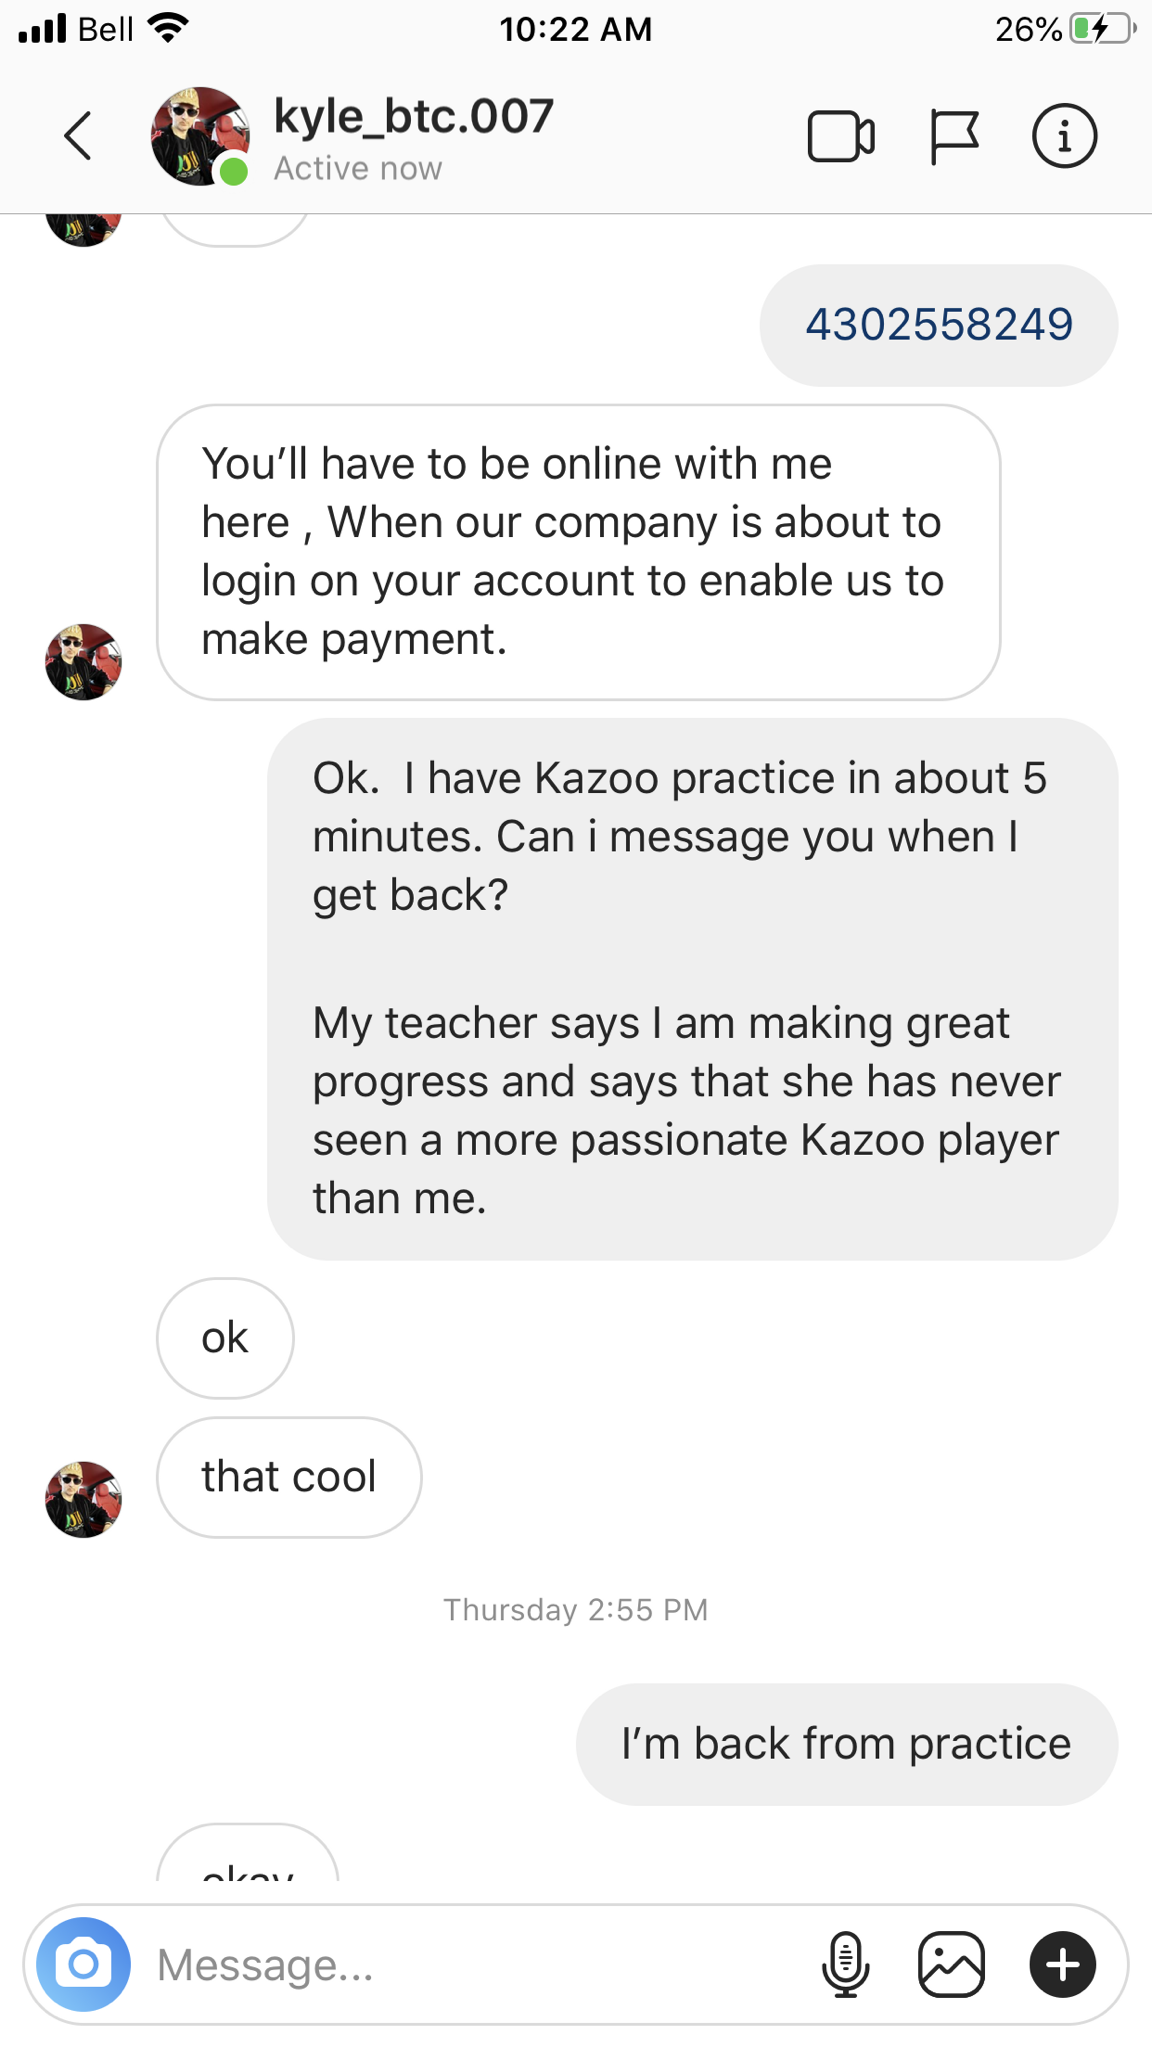 screenshot - il Bell 26% kyle_btc.007 4302558249 You'll have to be online with me here, When our company is about to login on your account to enable us to make payment. Ok. I have Kazoo practice in about 5 minutes. Can i message you when I get back? My te